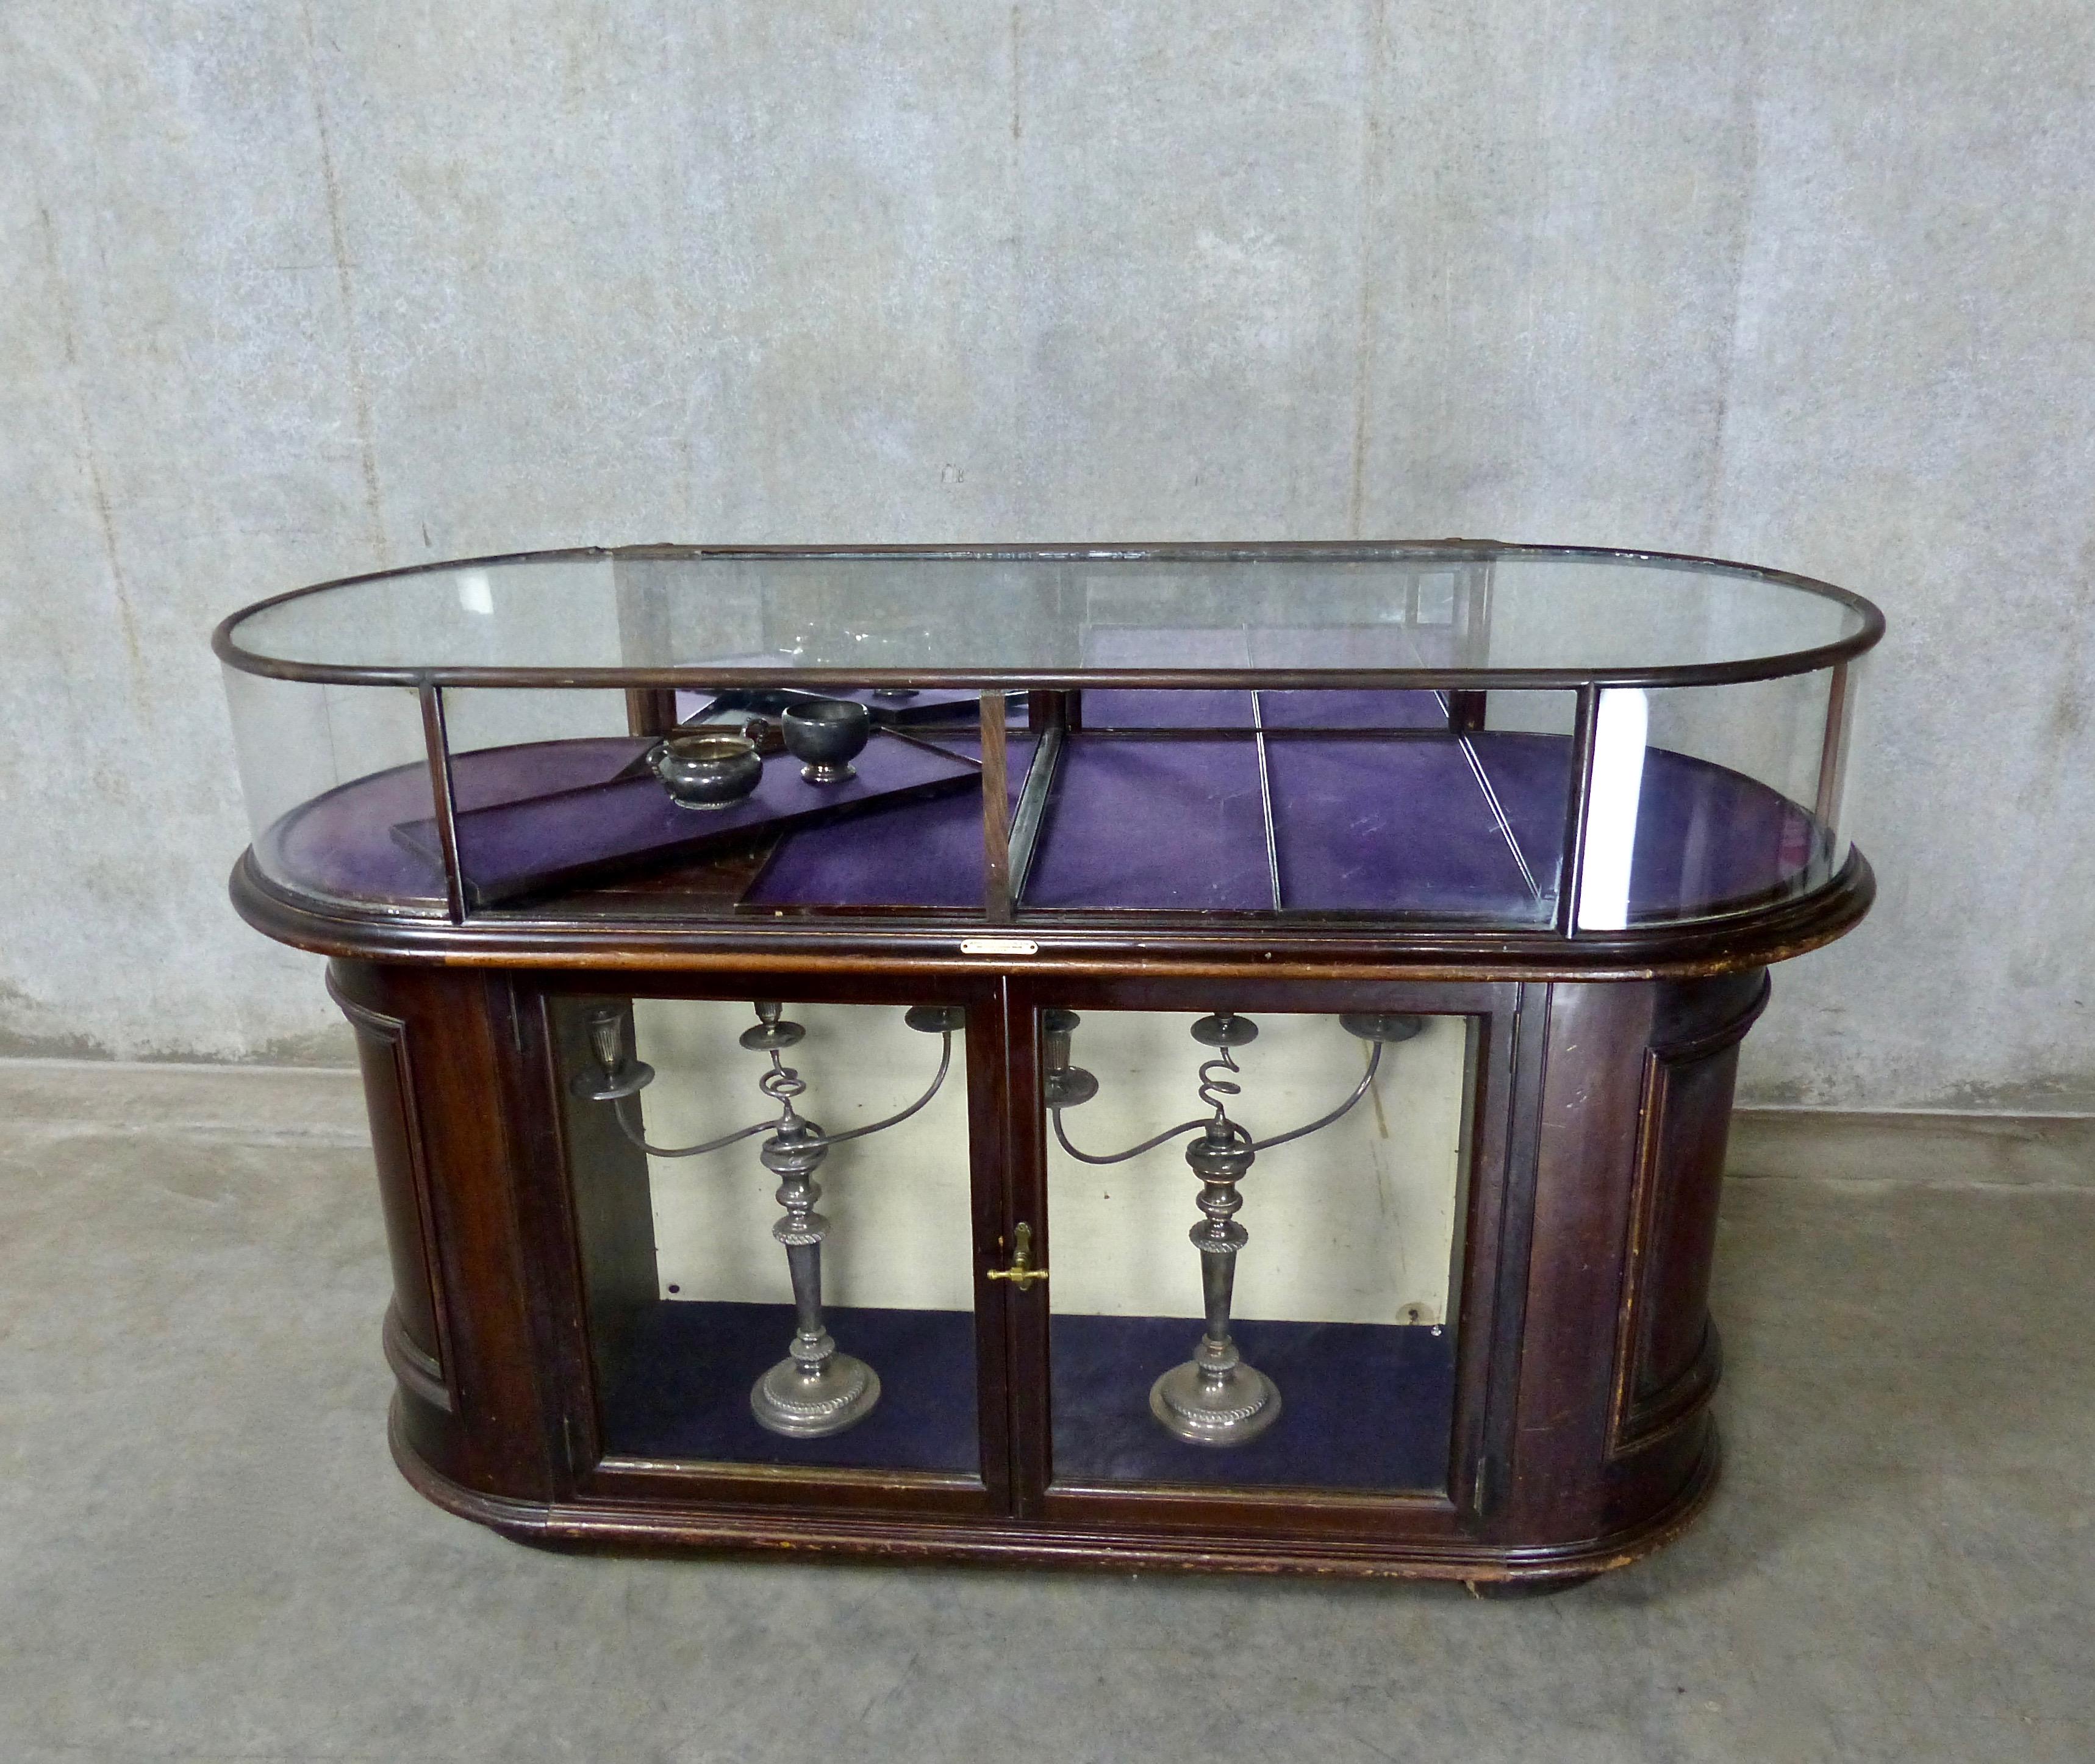 Mahogany 19th Century Victorian Curved Glass Display Case by Curtis, Leeds, England